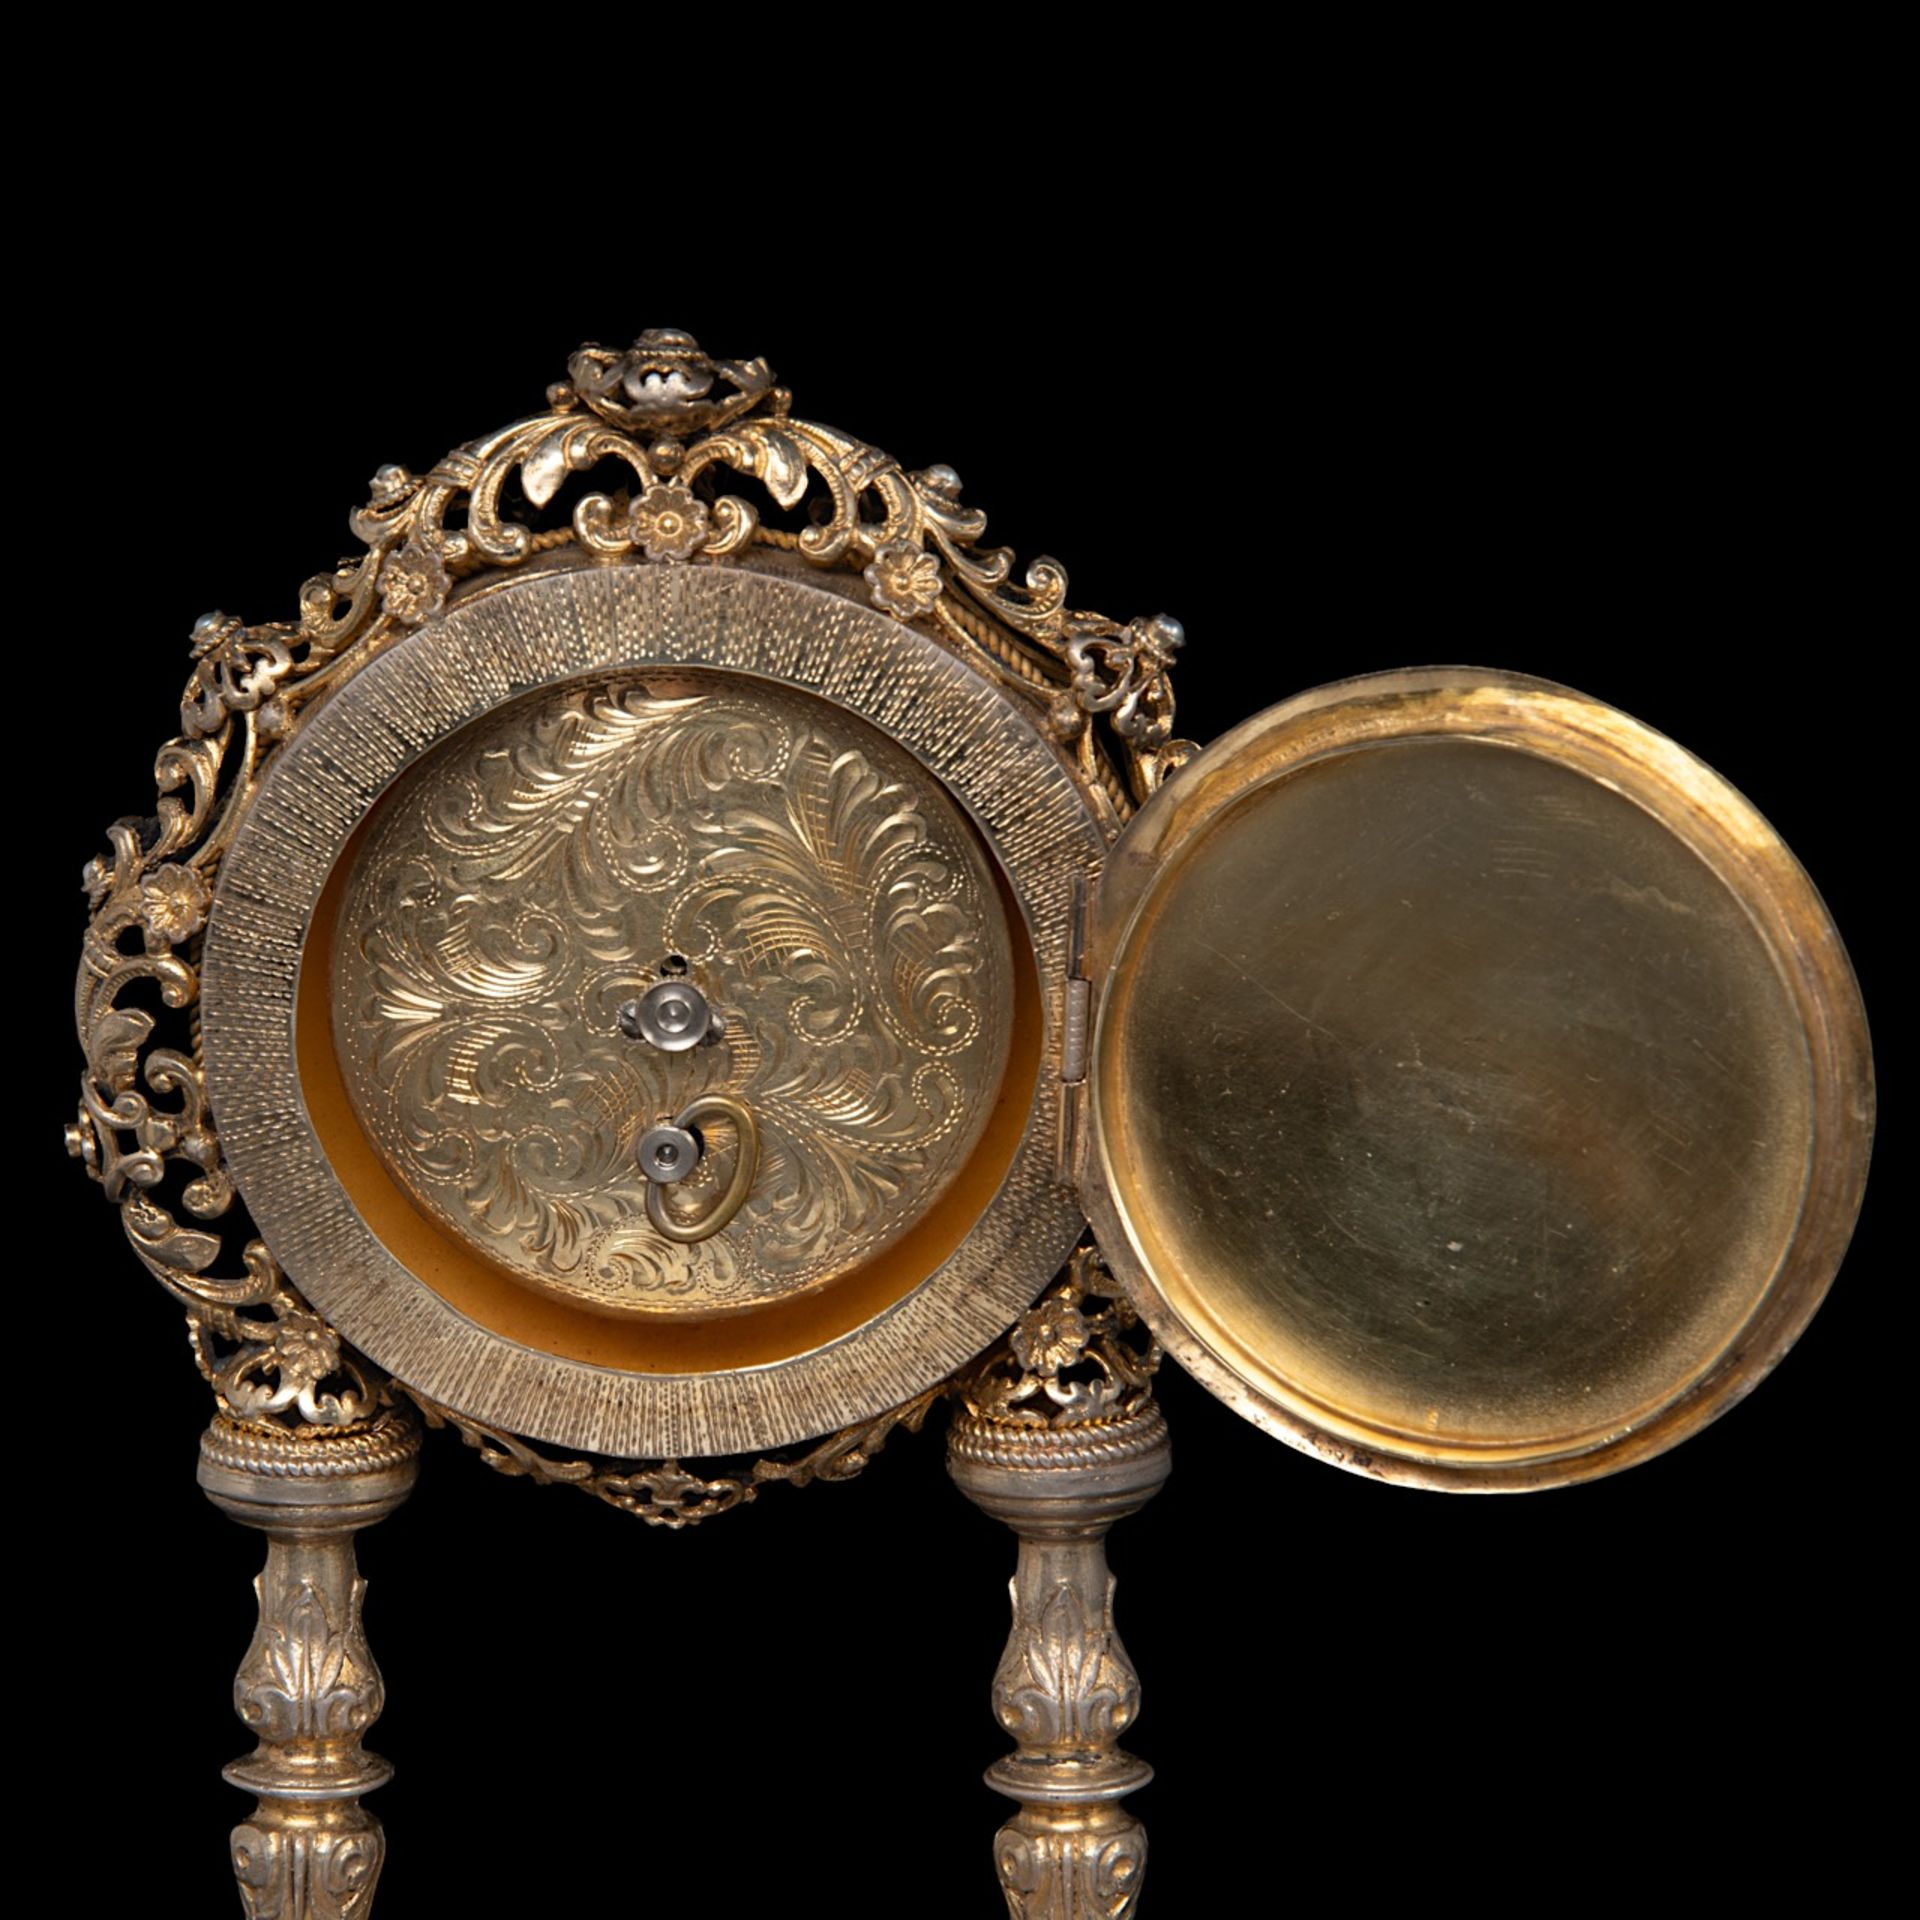 An Austrian gilt-silver and enamel clock with music box, decorated with semi-precious stones and mot - Image 7 of 7